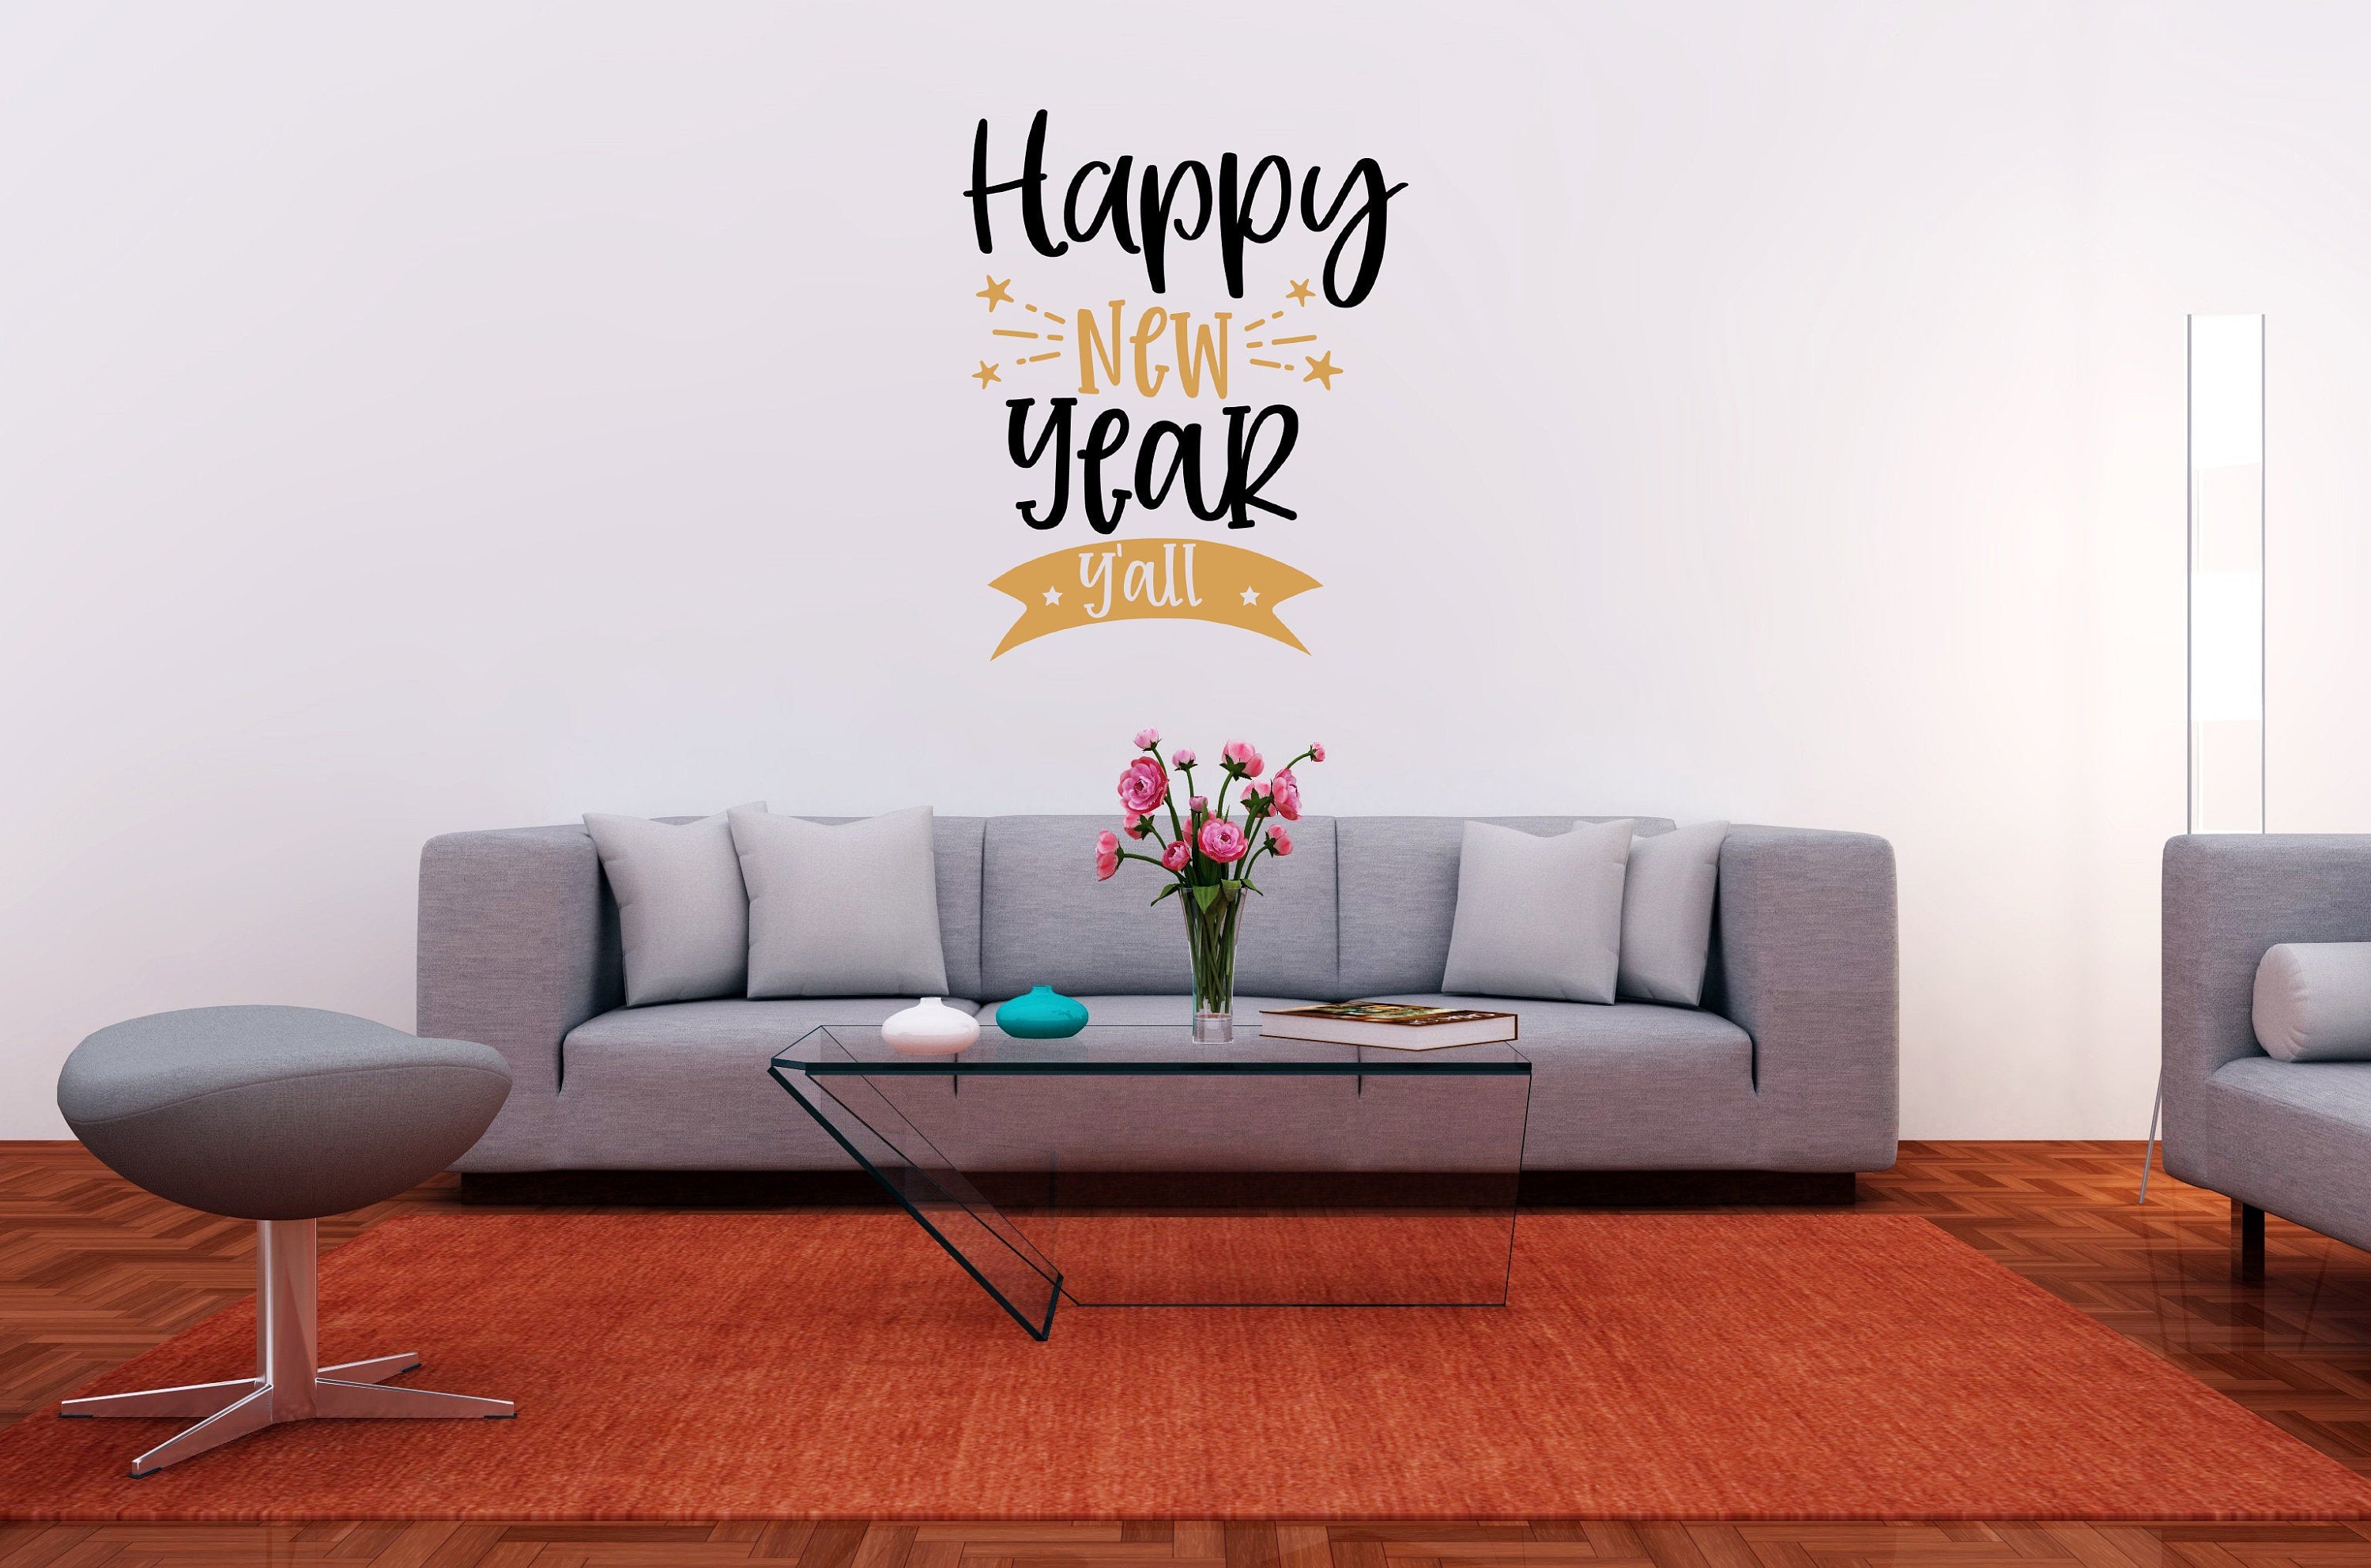 Happy New Year Y'all Vinyl Decal for DIY Signs, Walls, Wood, Metal, New Year's Eve Party & Event Decor, Gift,